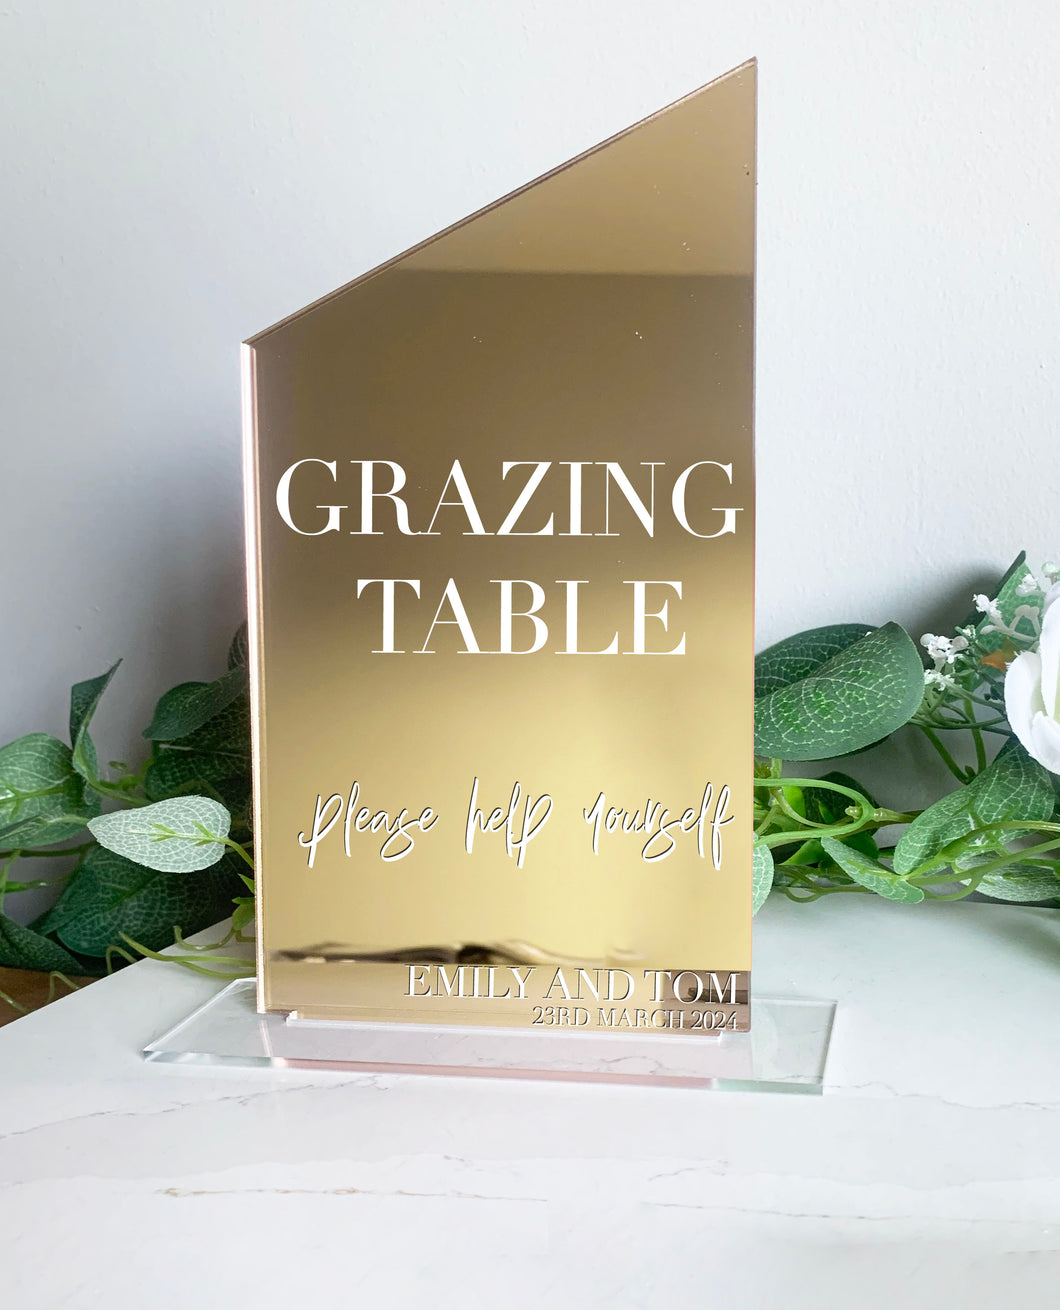 Grazing Table Please Help Yourself  Unique Freestanding Acrylic Wedding Table Sign